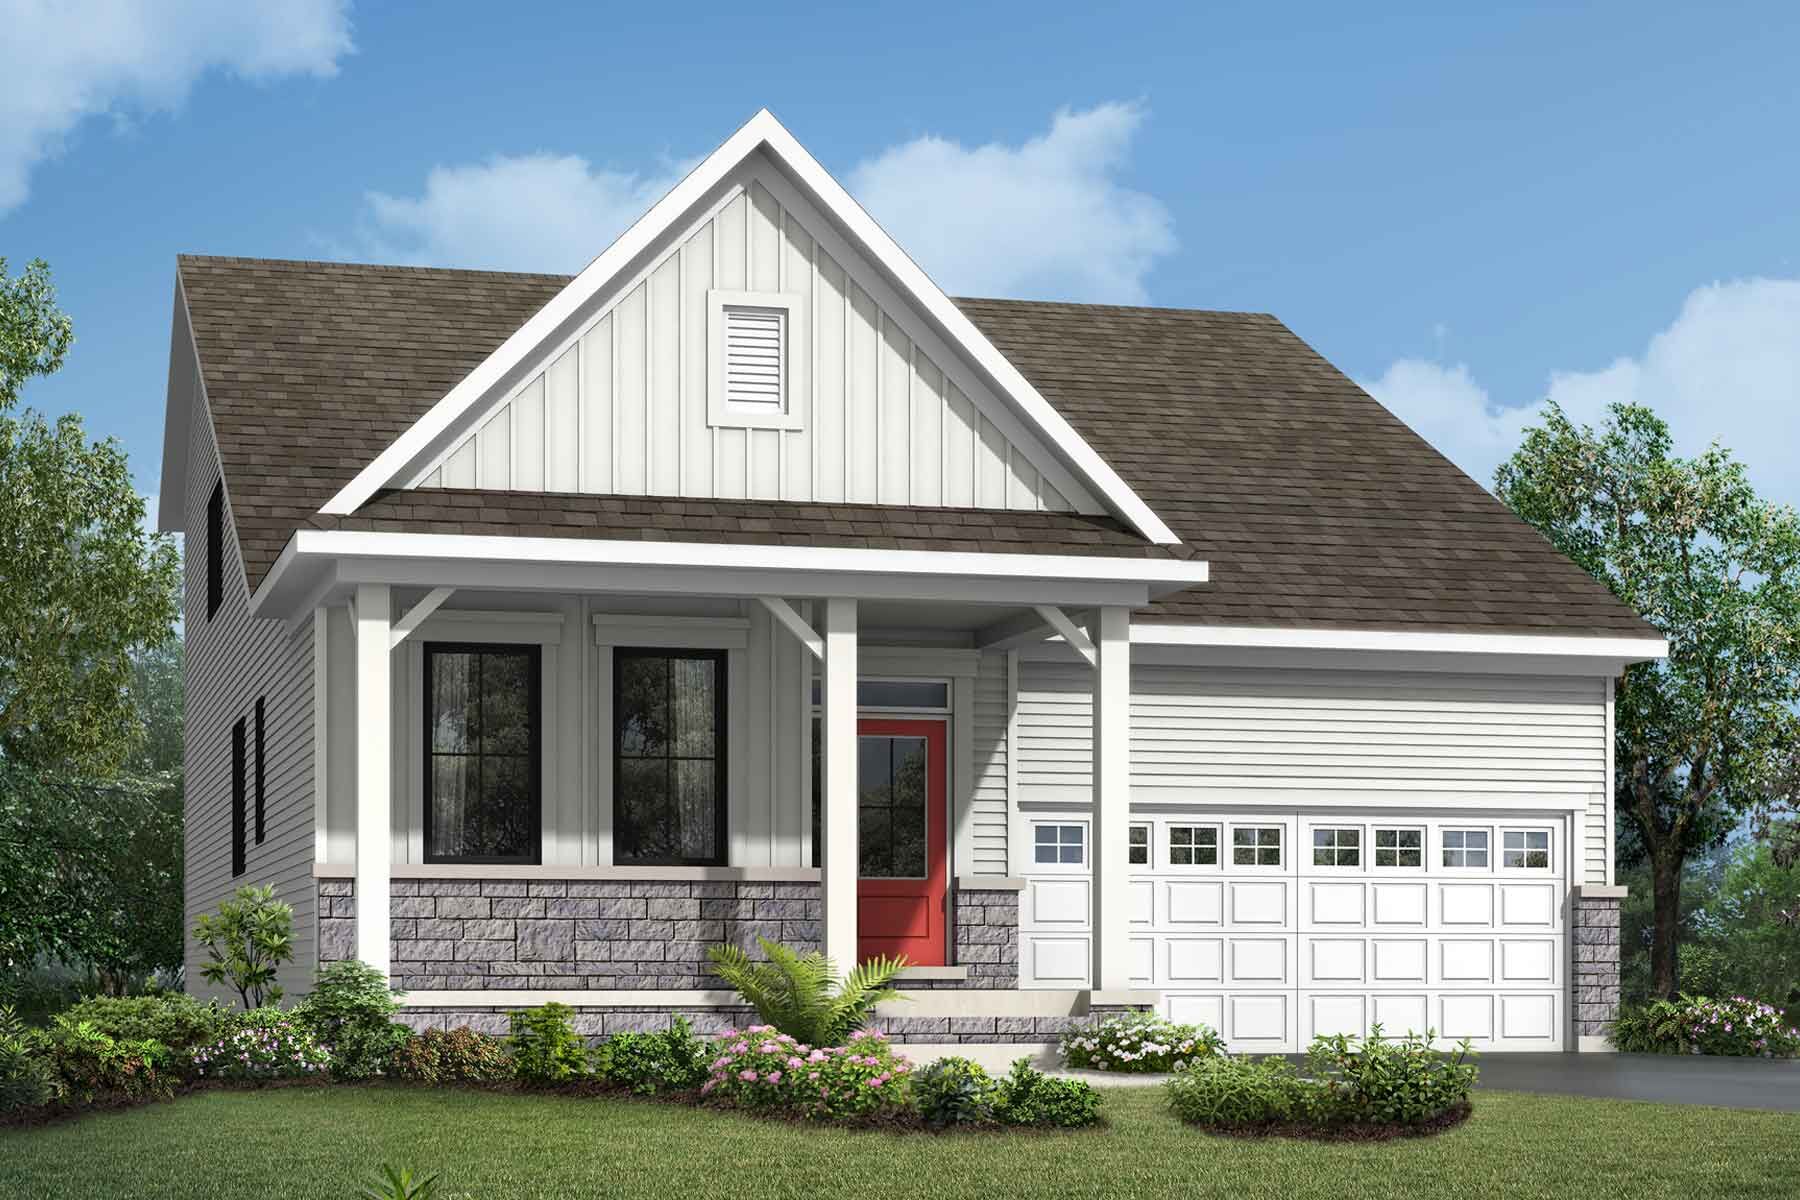 A Modern Farmhouse style detached home with a double car garage.